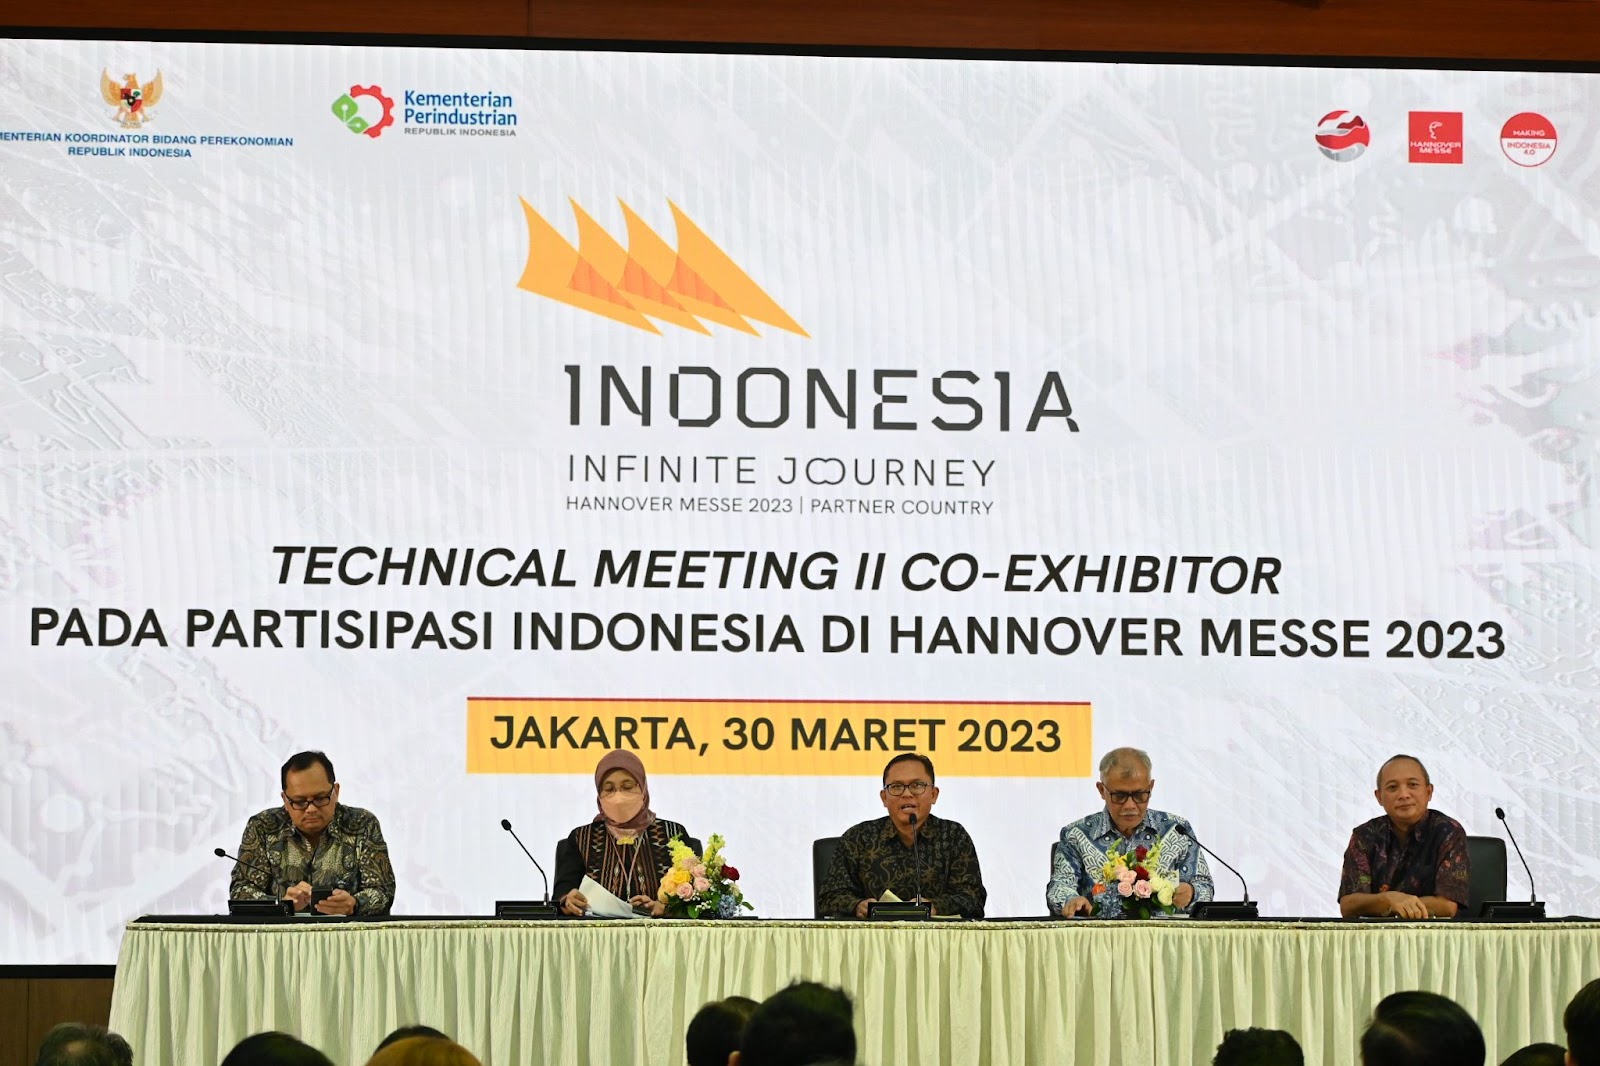 Kemenperin Continues to Prepare for Hannover Messe 2023